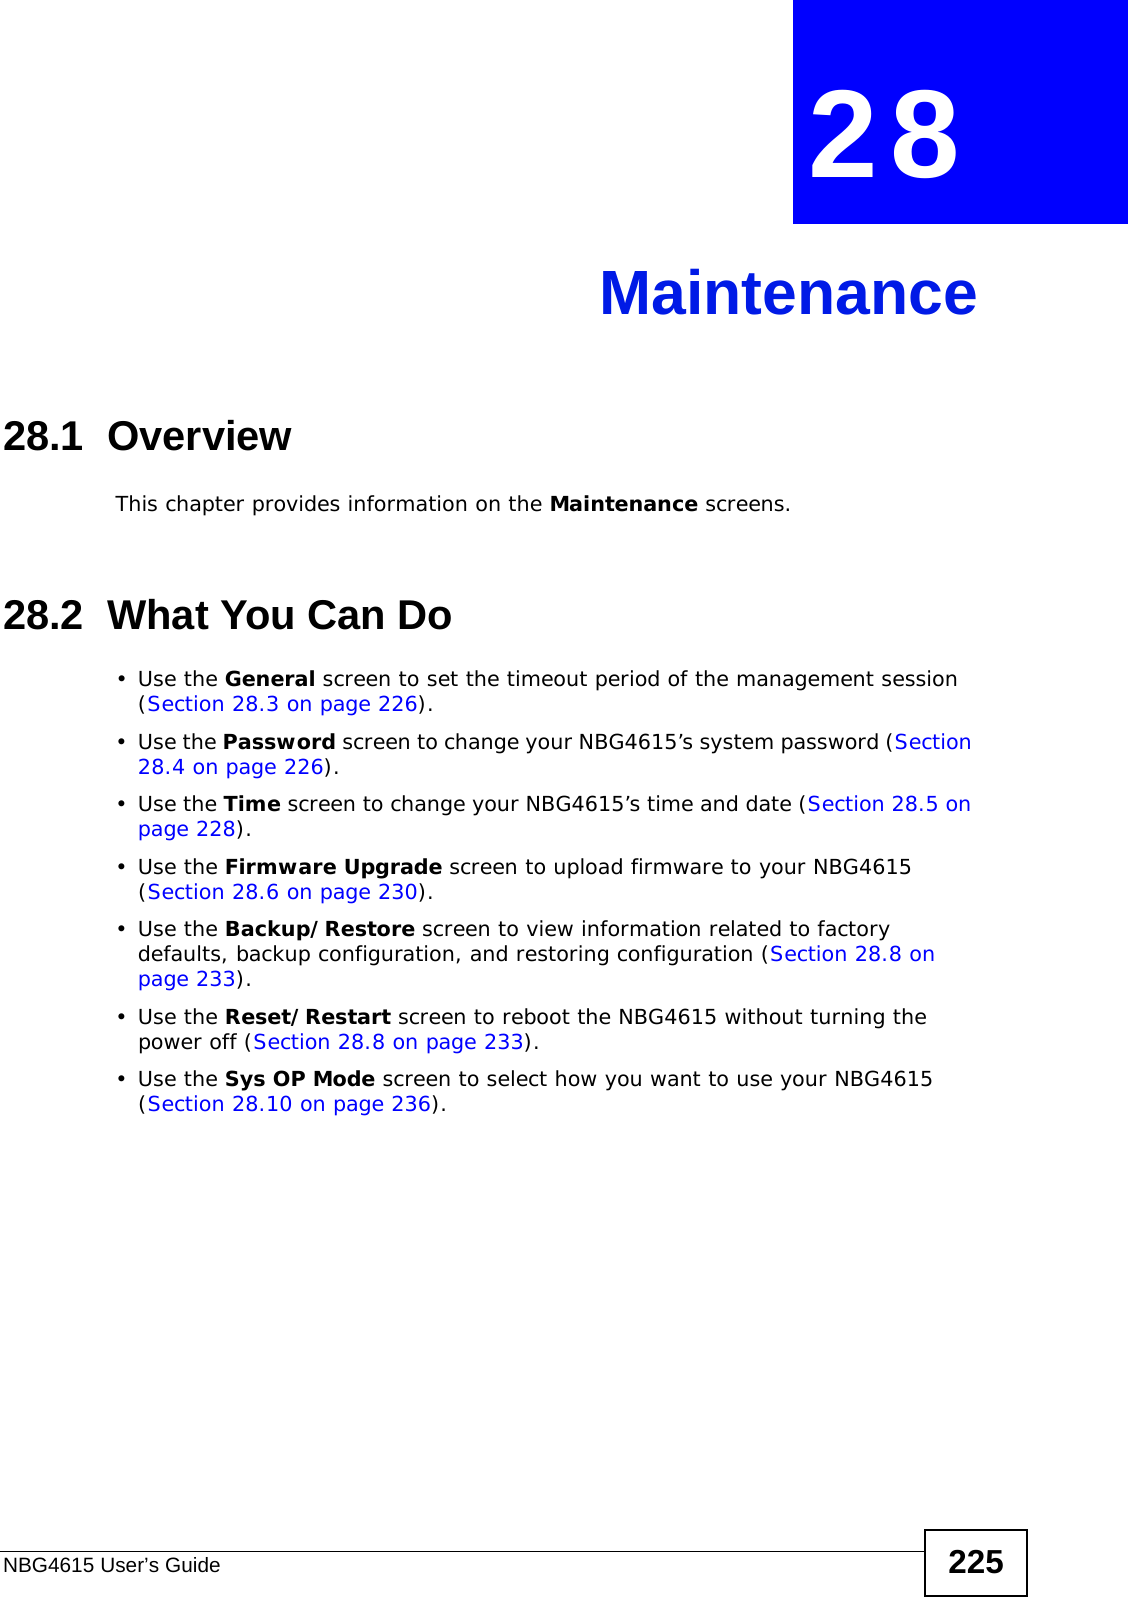 NBG4615 User’s Guide 225CHAPTER  28 Maintenance28.1  OverviewThis chapter provides information on the Maintenance screens. 28.2  What You Can Do•Use the General screen to set the timeout period of the management session (Section 28.3 on page 226). •Use the Password screen to change your NBG4615’s system password (Section 28.4 on page 226).•Use the Time screen to change your NBG4615’s time and date (Section 28.5 on page 228).•Use the Firmware Upgrade screen to upload firmware to your NBG4615 (Section 28.6 on page 230).•Use the Backup/Restore screen to view information related to factory defaults, backup configuration, and restoring configuration (Section 28.8 on page 233).•Use the Reset/Restart screen to reboot the NBG4615 without turning the power off (Section 28.8 on page 233).•Use the Sys OP Mode screen to select how you want to use your NBG4615 (Section 28.10 on page 236). 